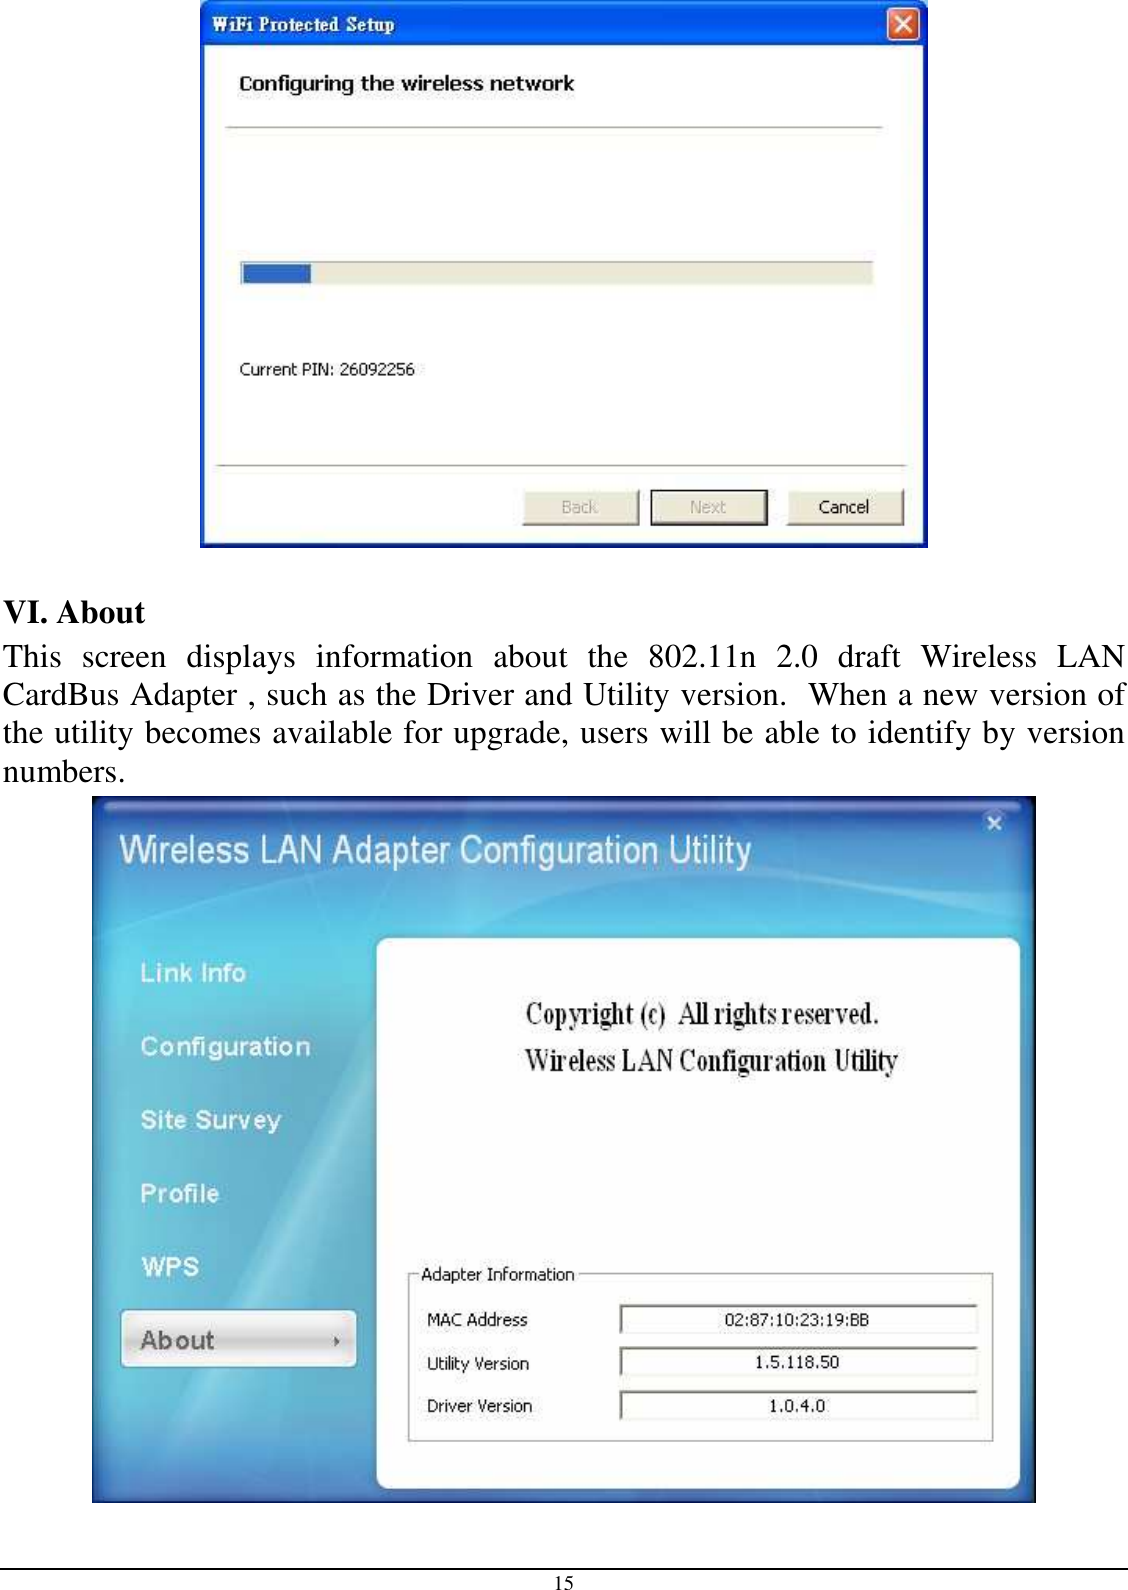 15   VI. About  This  screen  displays  information  about  the  802.11n  2.0  draft  Wireless  LAN CardBus Adapter , such as the Driver and Utility version.  When a new version of the utility becomes available for upgrade, users will be able to identify by version numbers.  